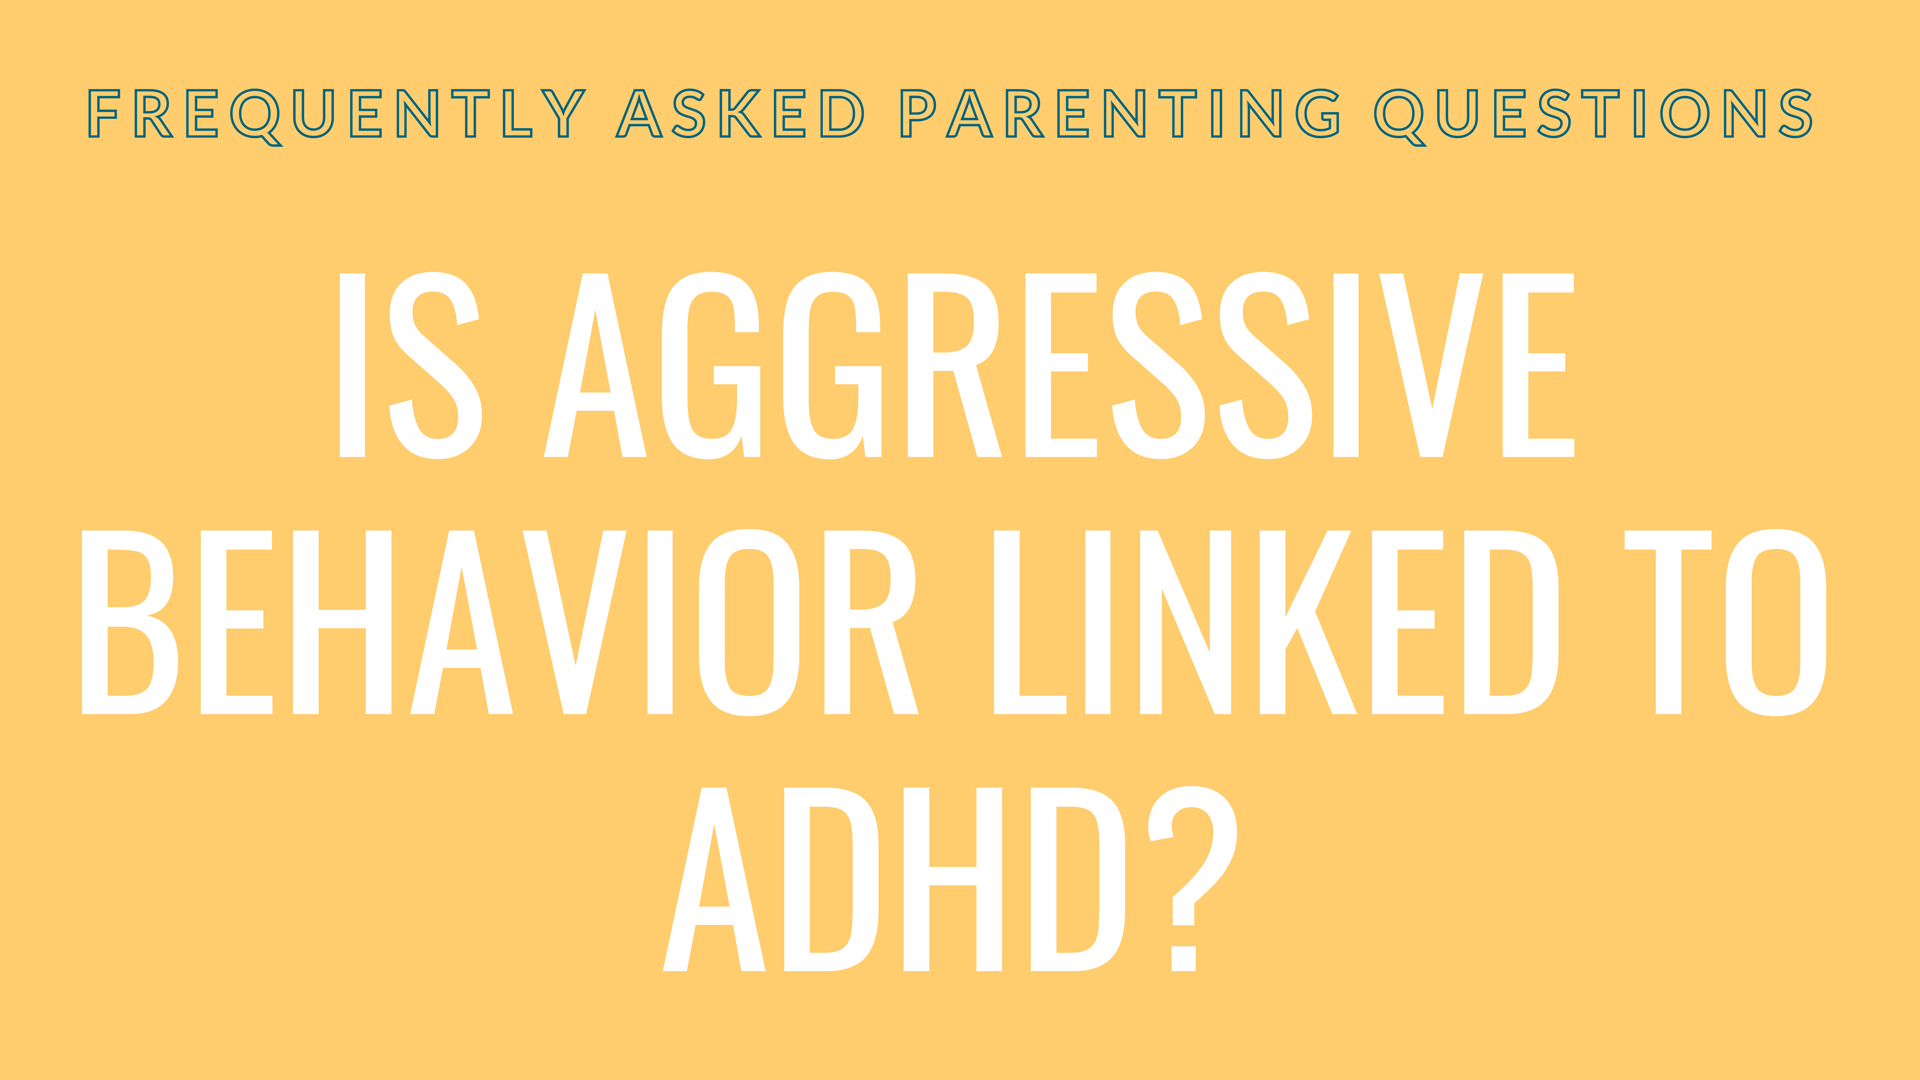 Is aggressive behavior linked to ADHD?